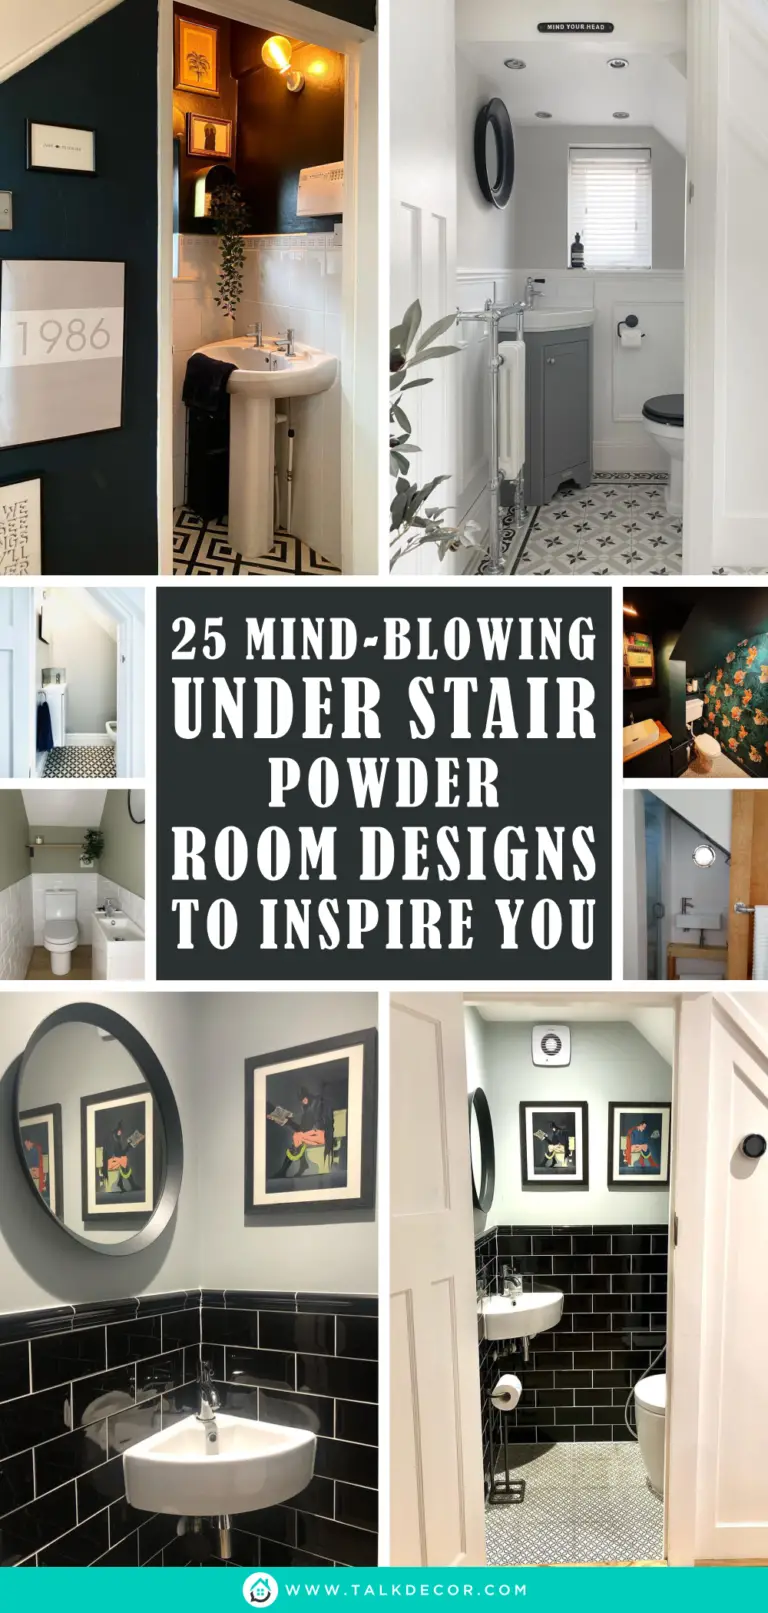 25 Mind-Blowing Under Stair Powder Room Designs To Inspire You - Talkdecor